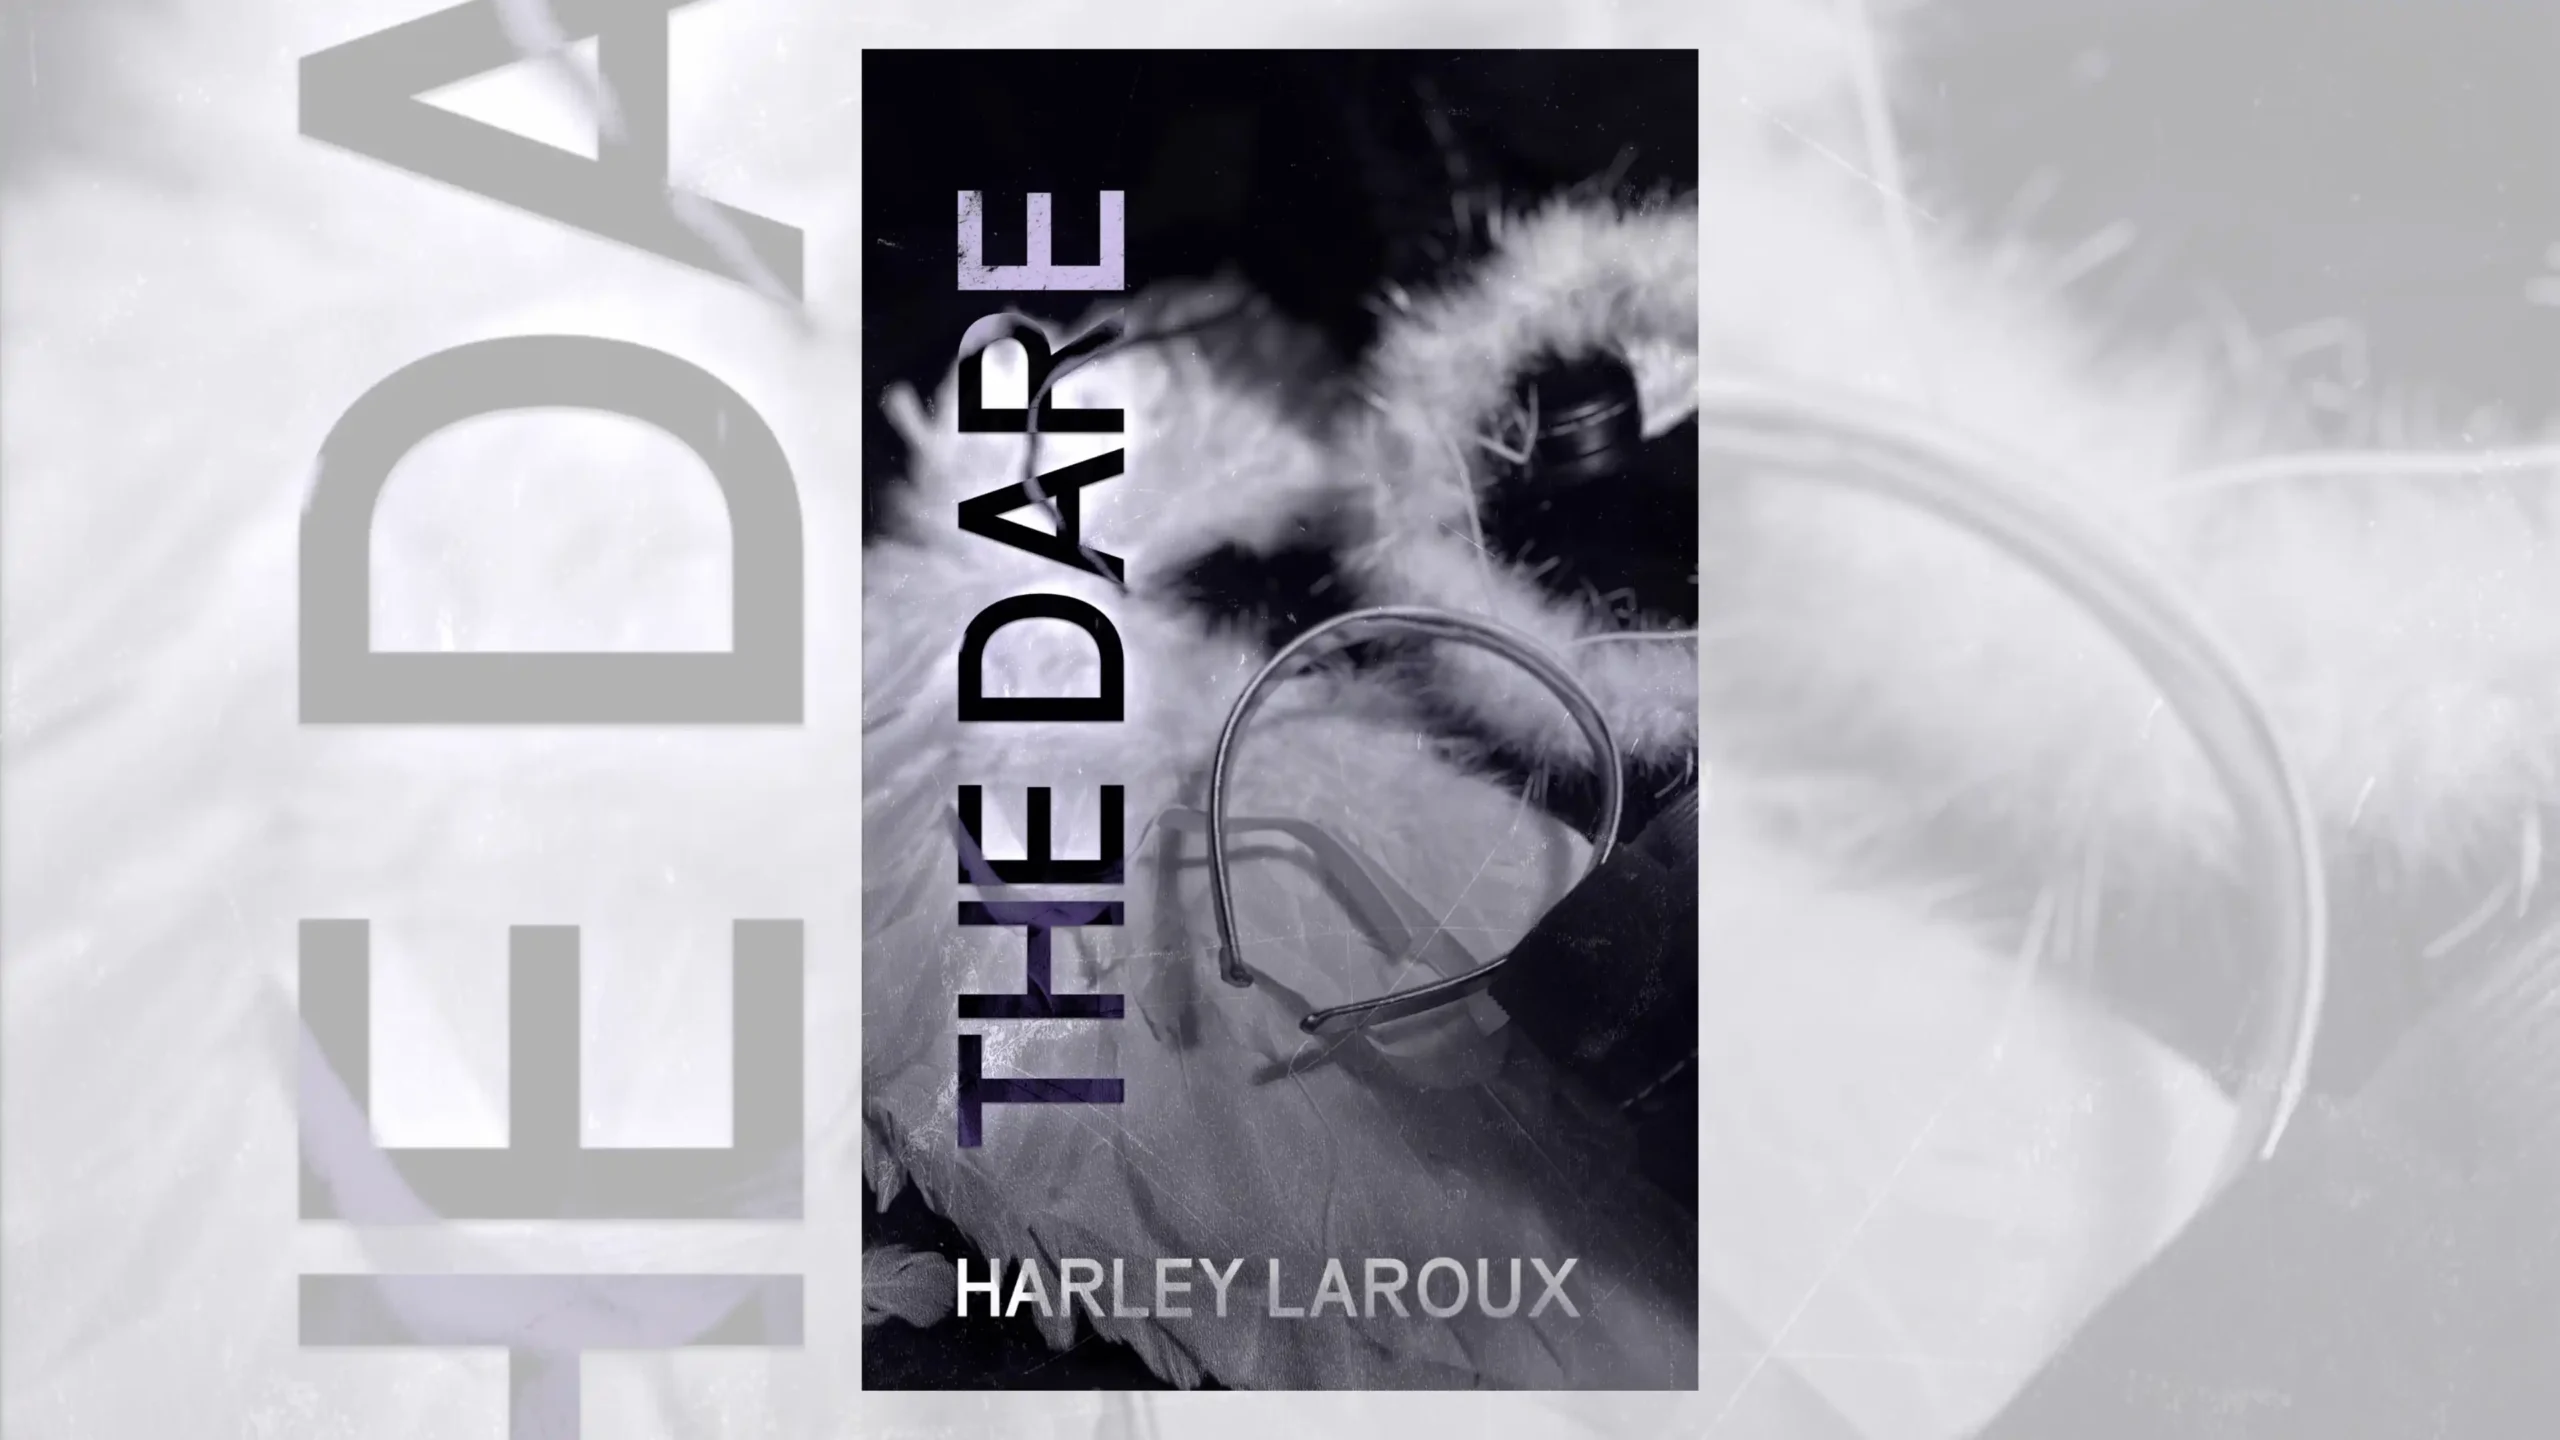 The deal harley laroux scaled